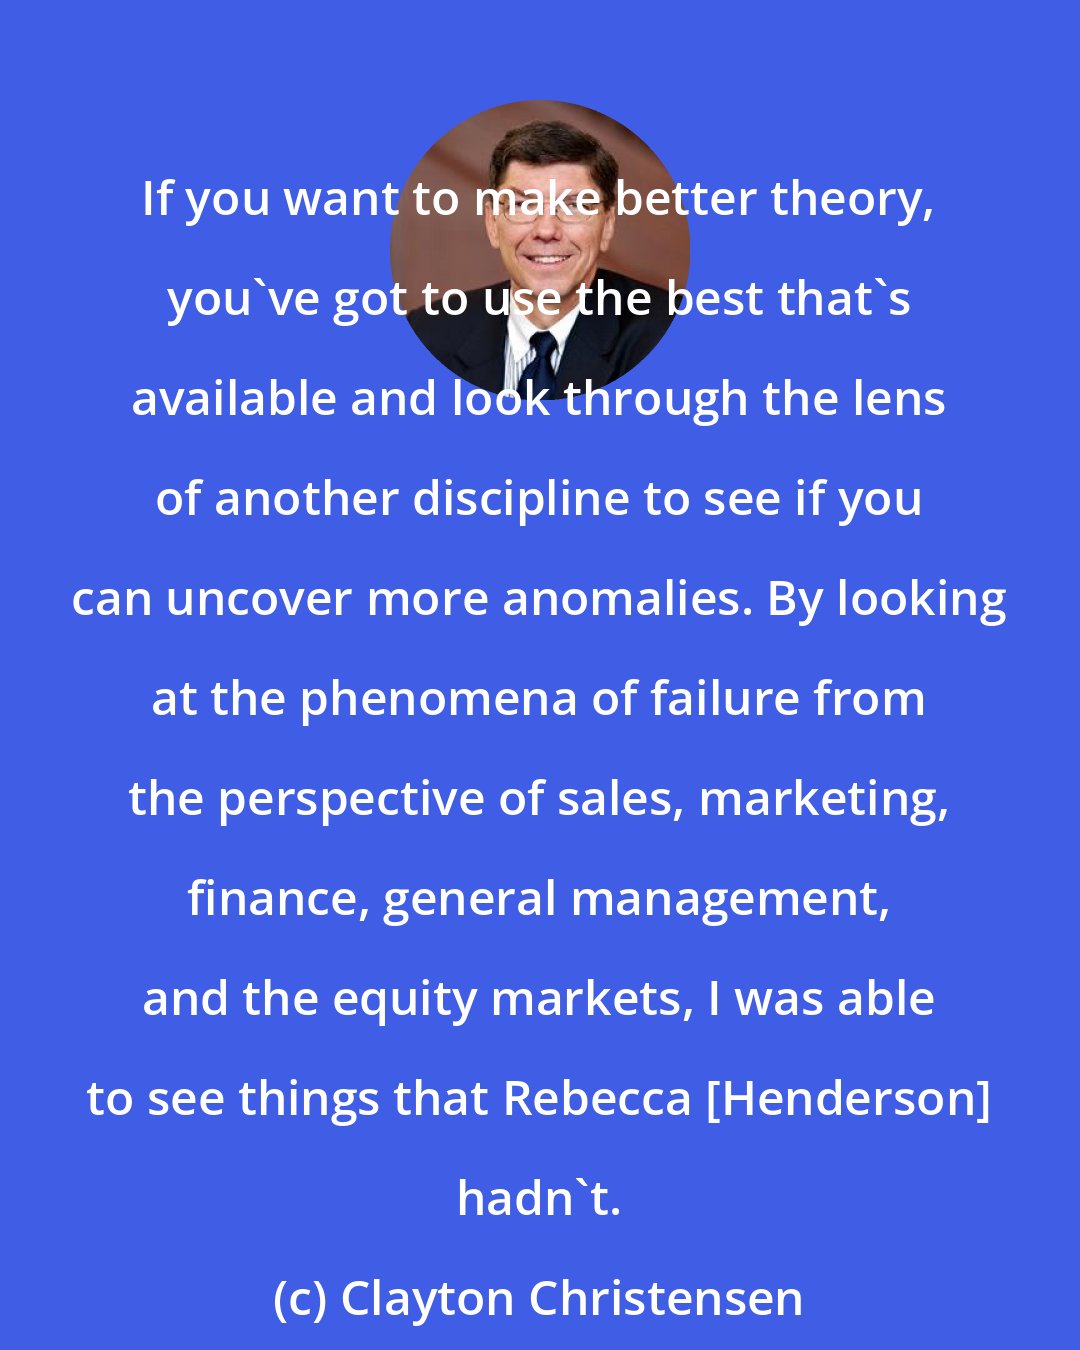 Clayton Christensen: If you want to make better theory, you've got to use the best that's available and look through the lens of another discipline to see if you can uncover more anomalies. By looking at the phenomena of failure from the perspective of sales, marketing, finance, general management, and the equity markets, I was able to see things that Rebecca [Henderson] hadn't.